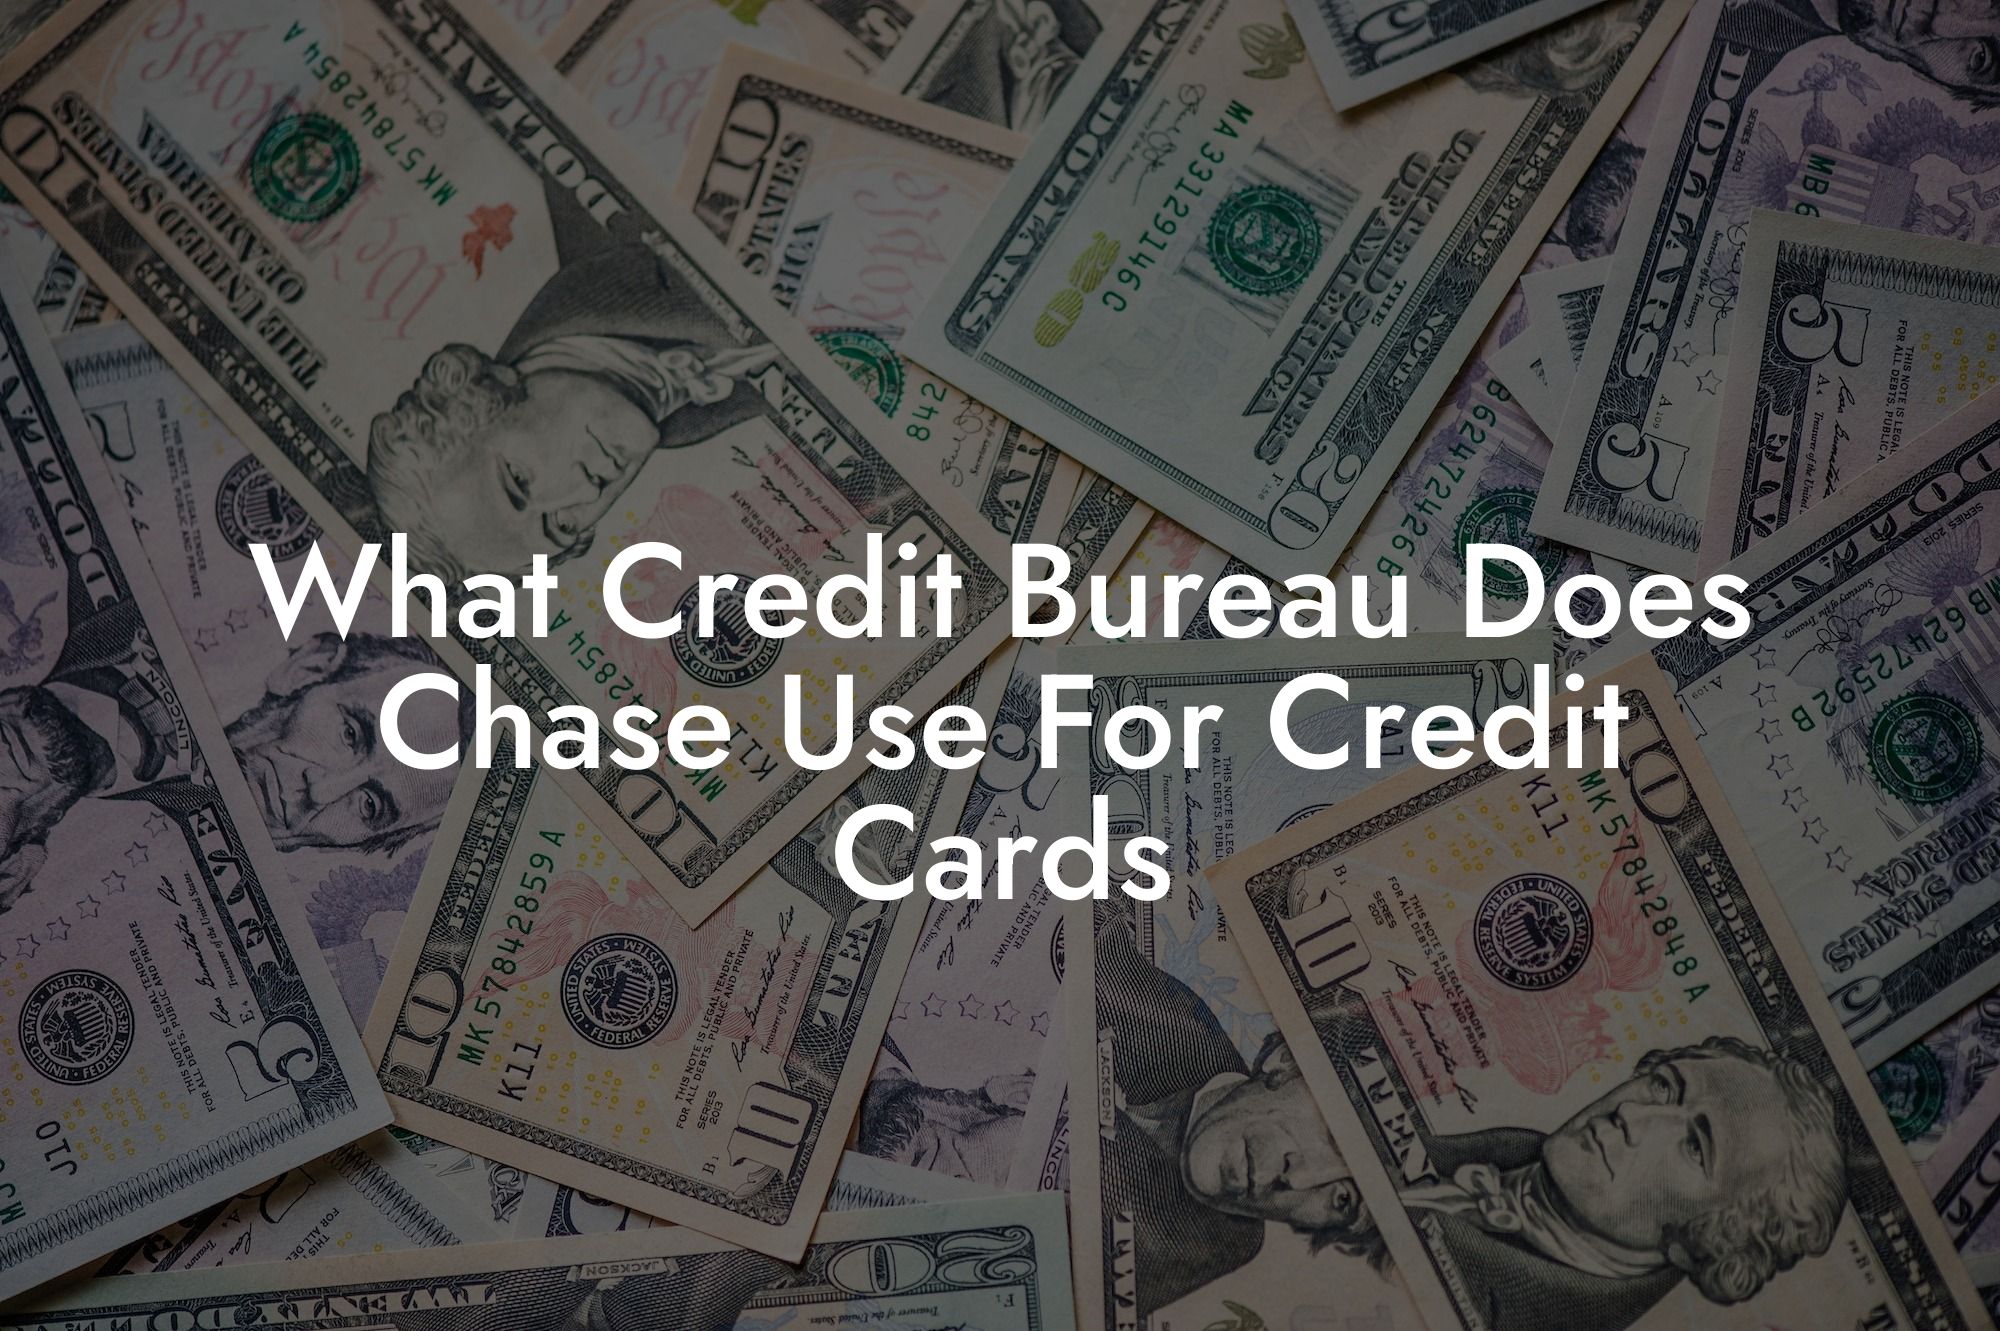 What Credit Bureau Does Chase Use For Credit Cards